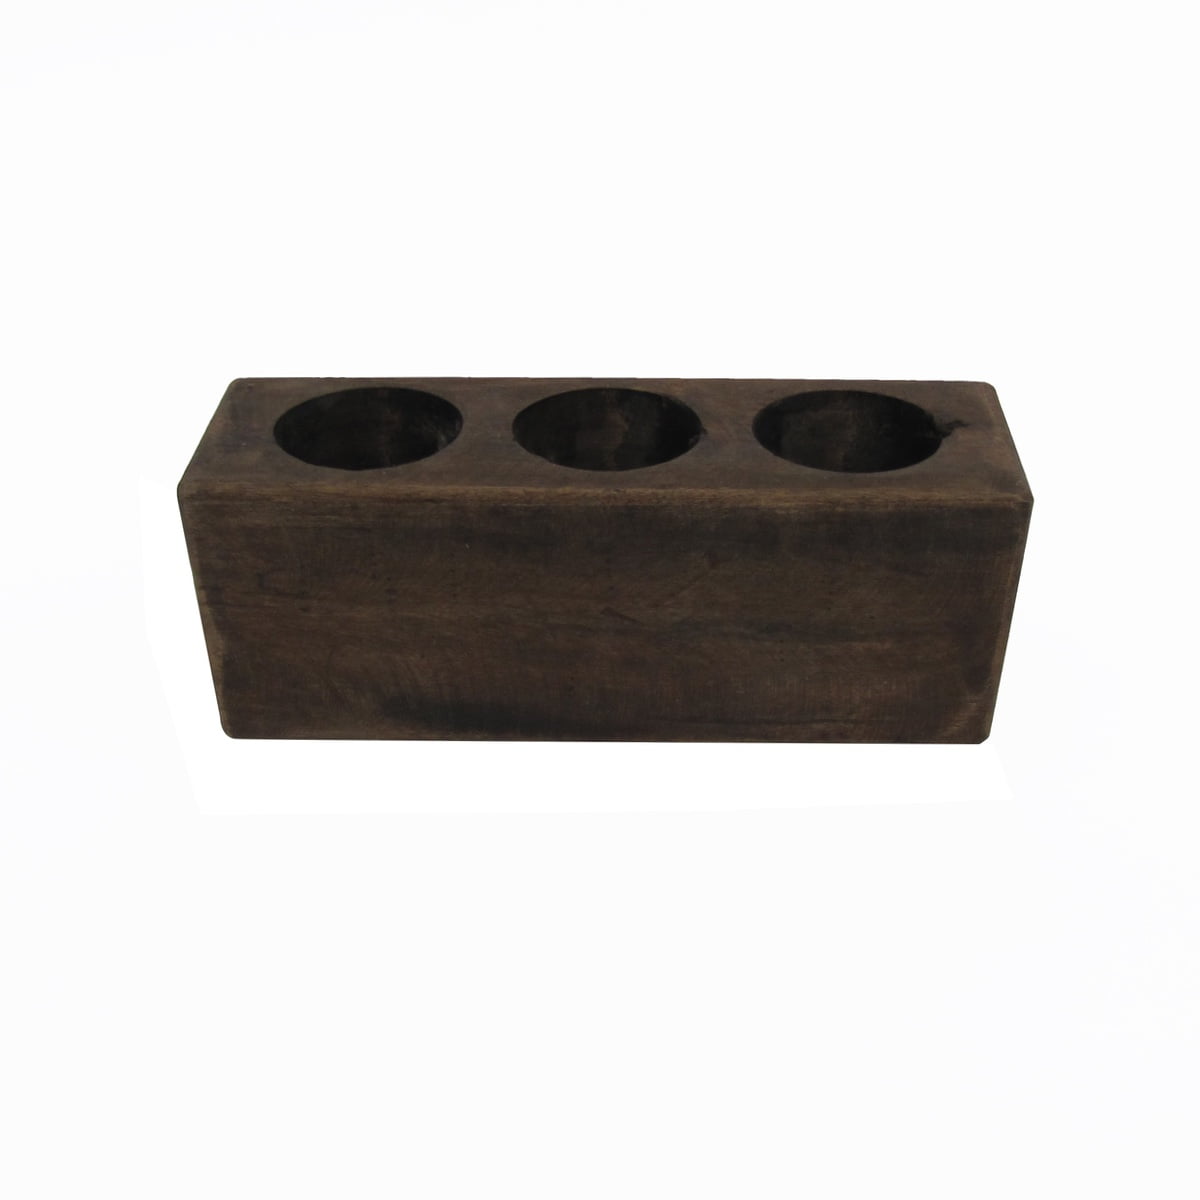 10 Hole Wooden Sugar Mold Wood Candle Holder Primitive Rustic Home Decor 